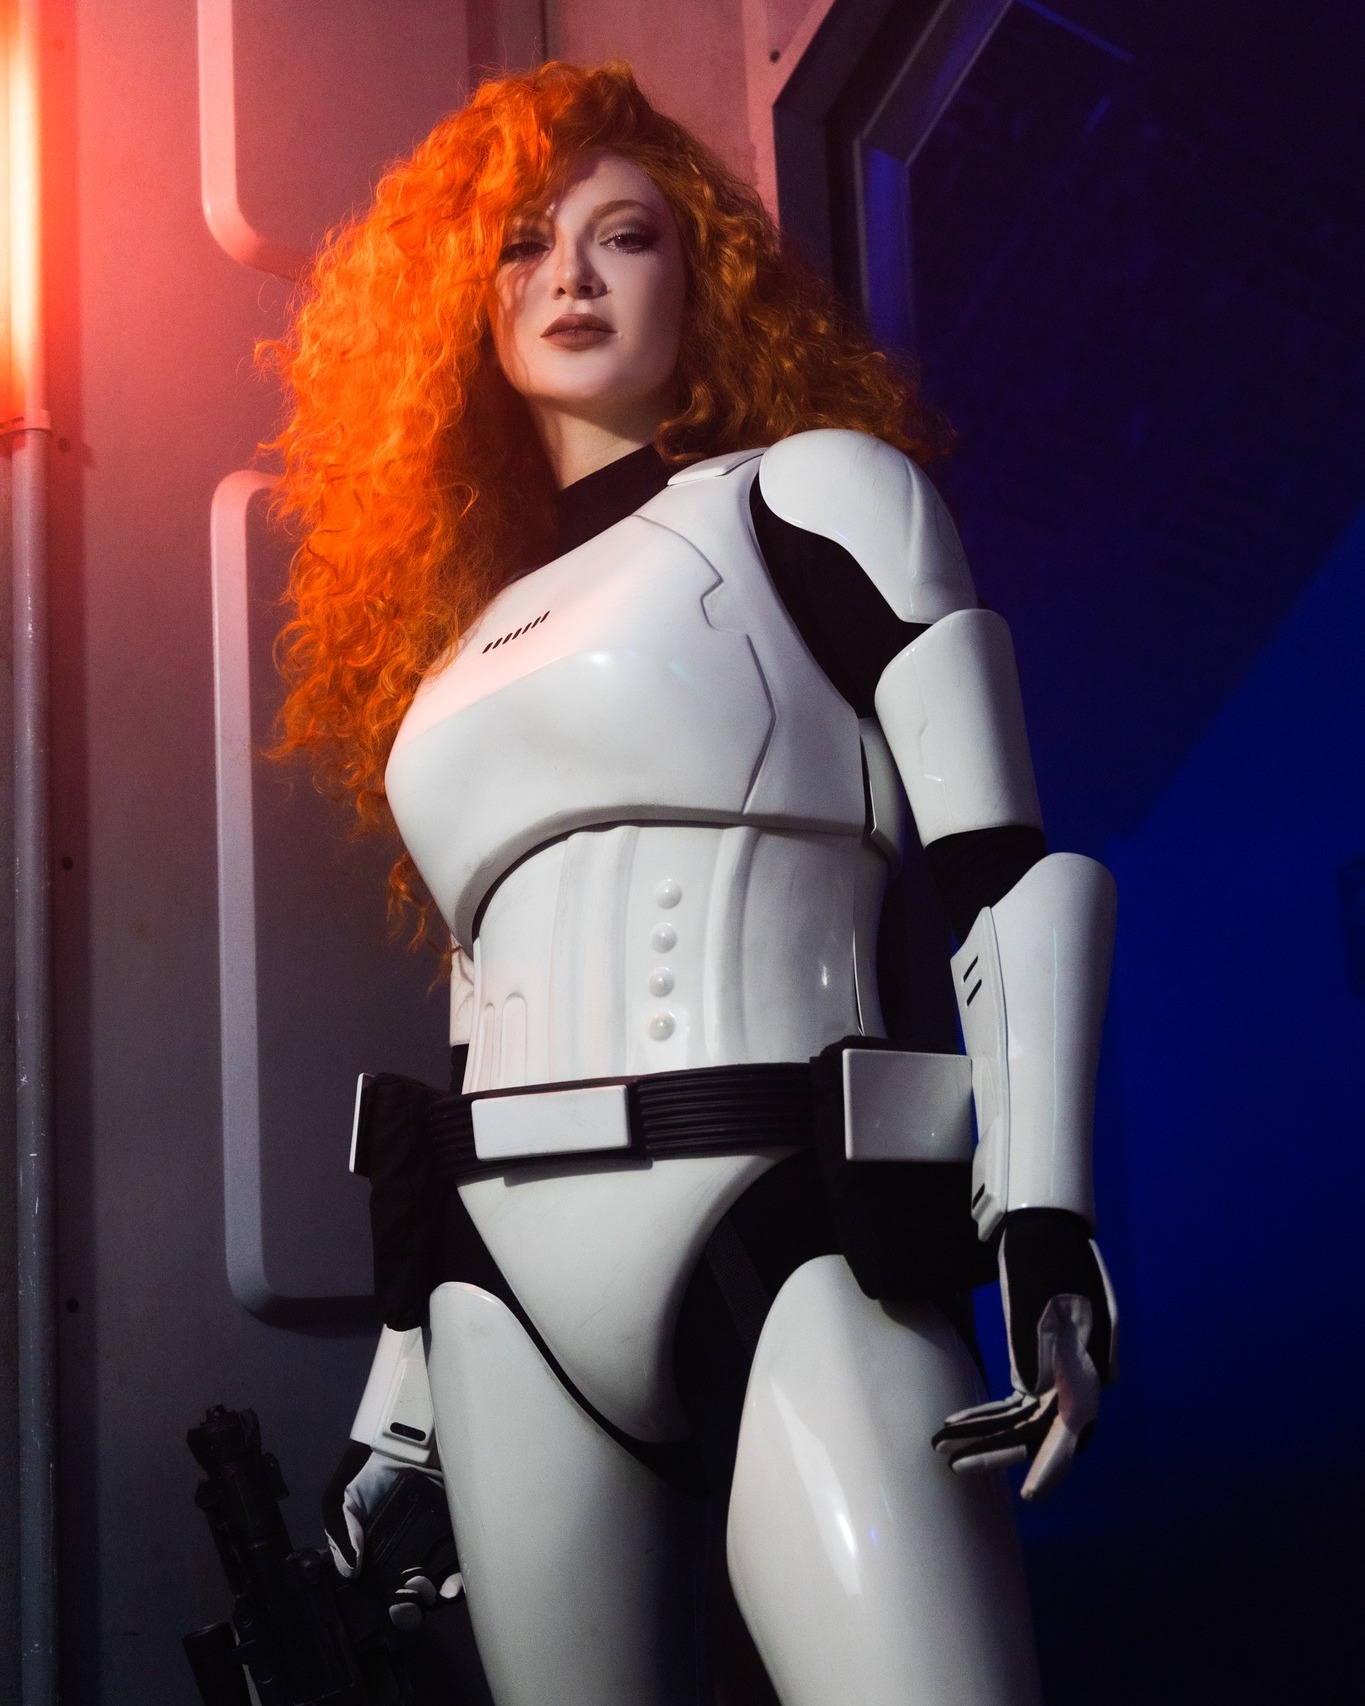 May the Fourth be with you! Or do you prefer Revenge of the Fifth..?

Happy Star Wars weekend!! I think I need to do more Star Wars cosplays soon, who should I cosplay next 👀?

#StarWars #Maythe4th #stormtrooper #Princessleia #cosplay